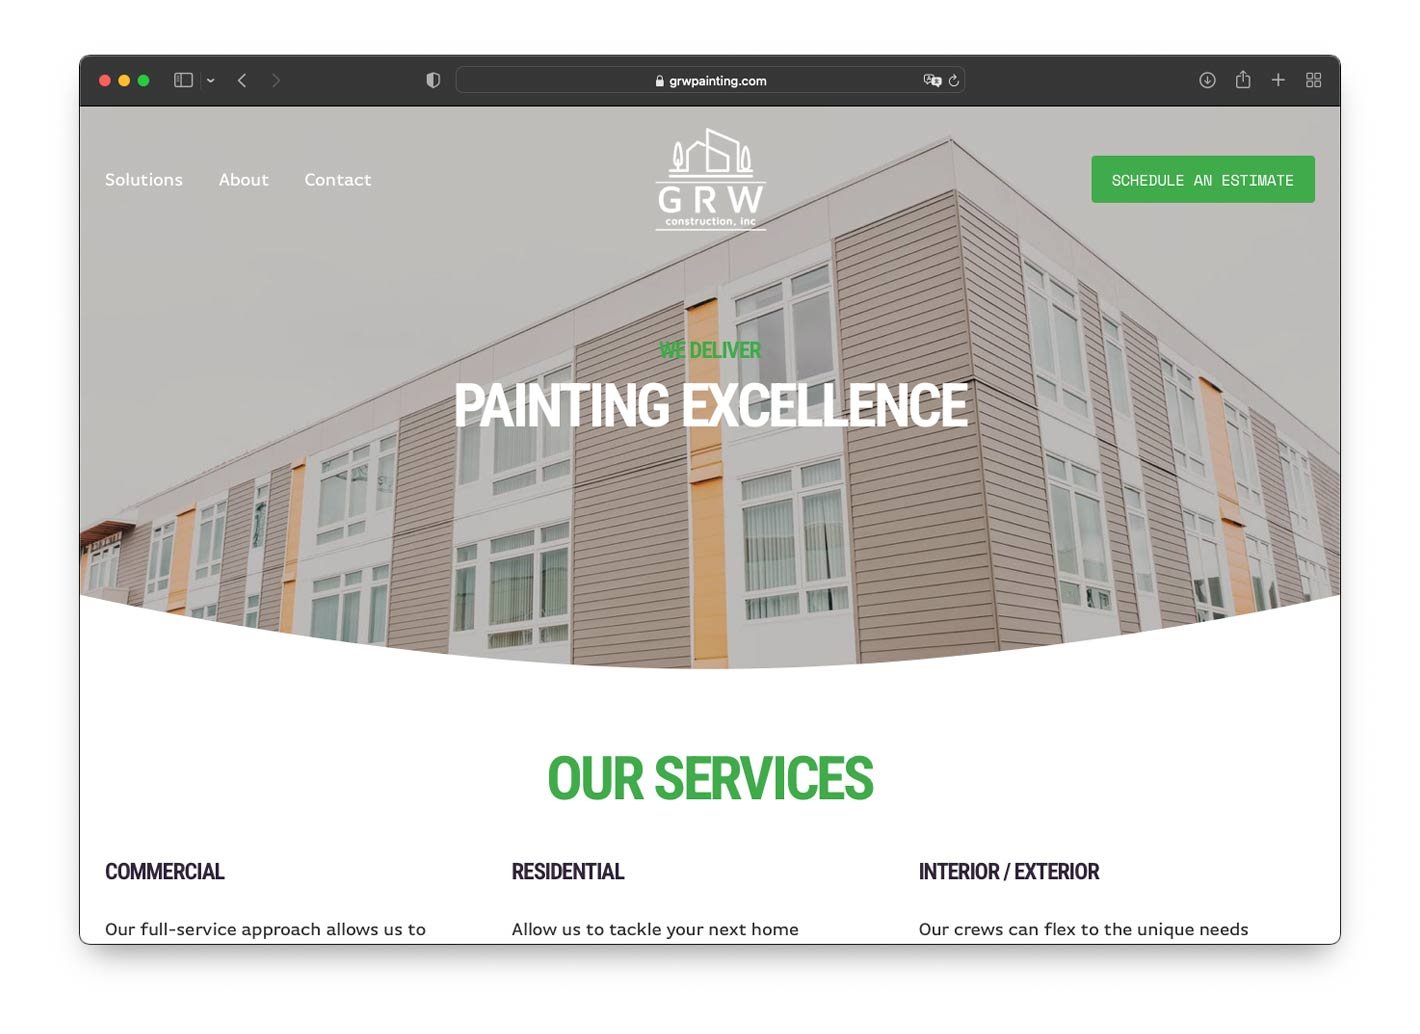 Website strategy and design for GRW Painting